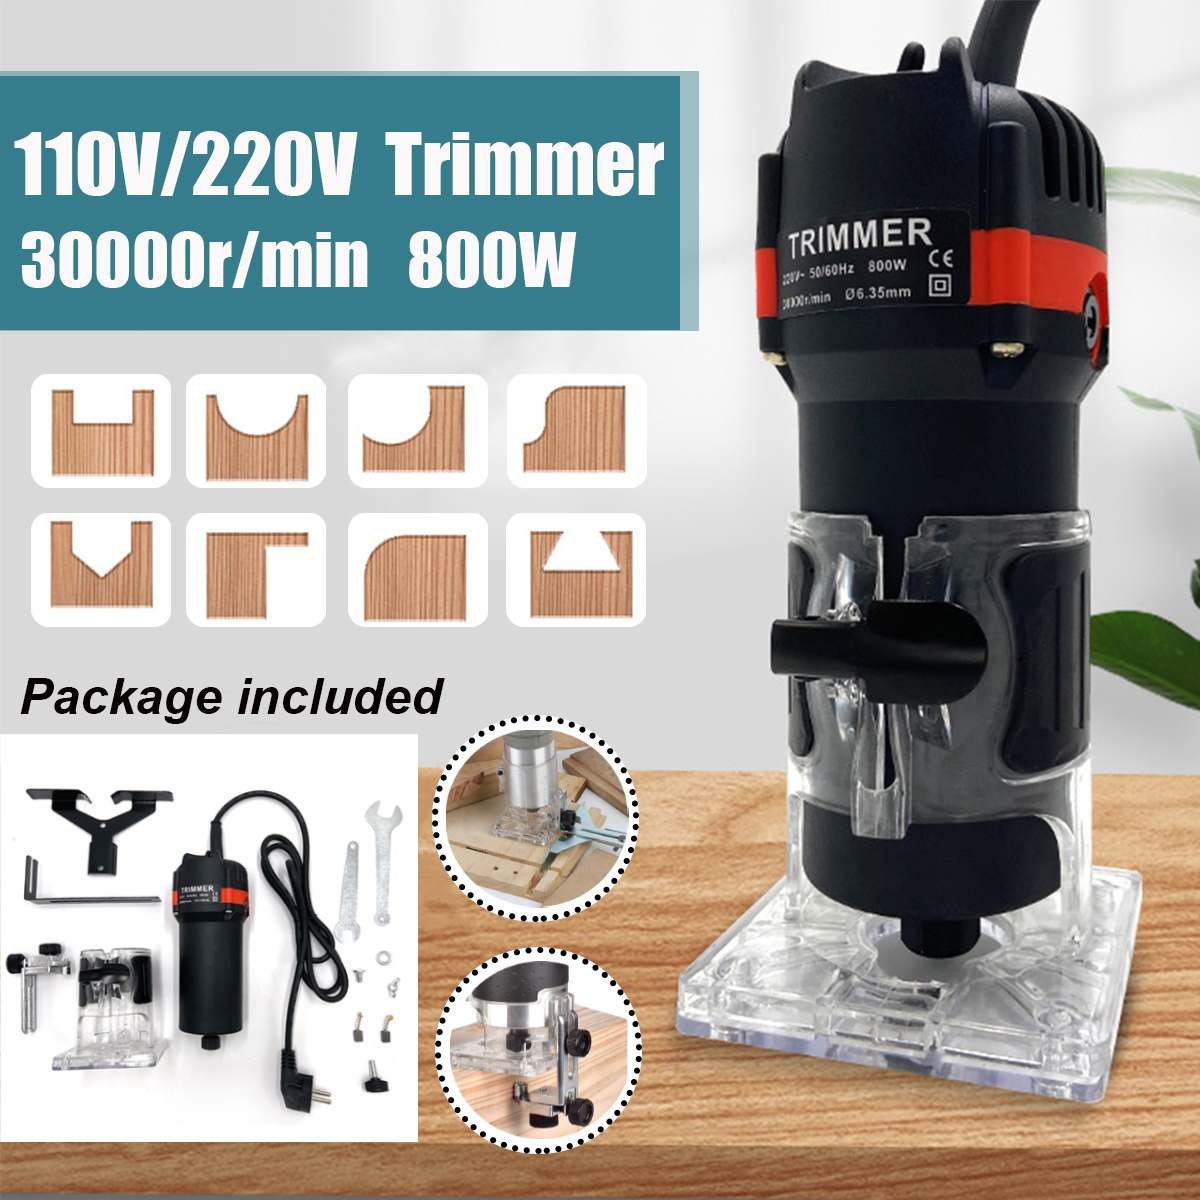 EU US Plug 800W 30000RPM Woodworking Electric Trimmer Wood Milling Engraving Carving Slotting Trimming Machine Wood Router